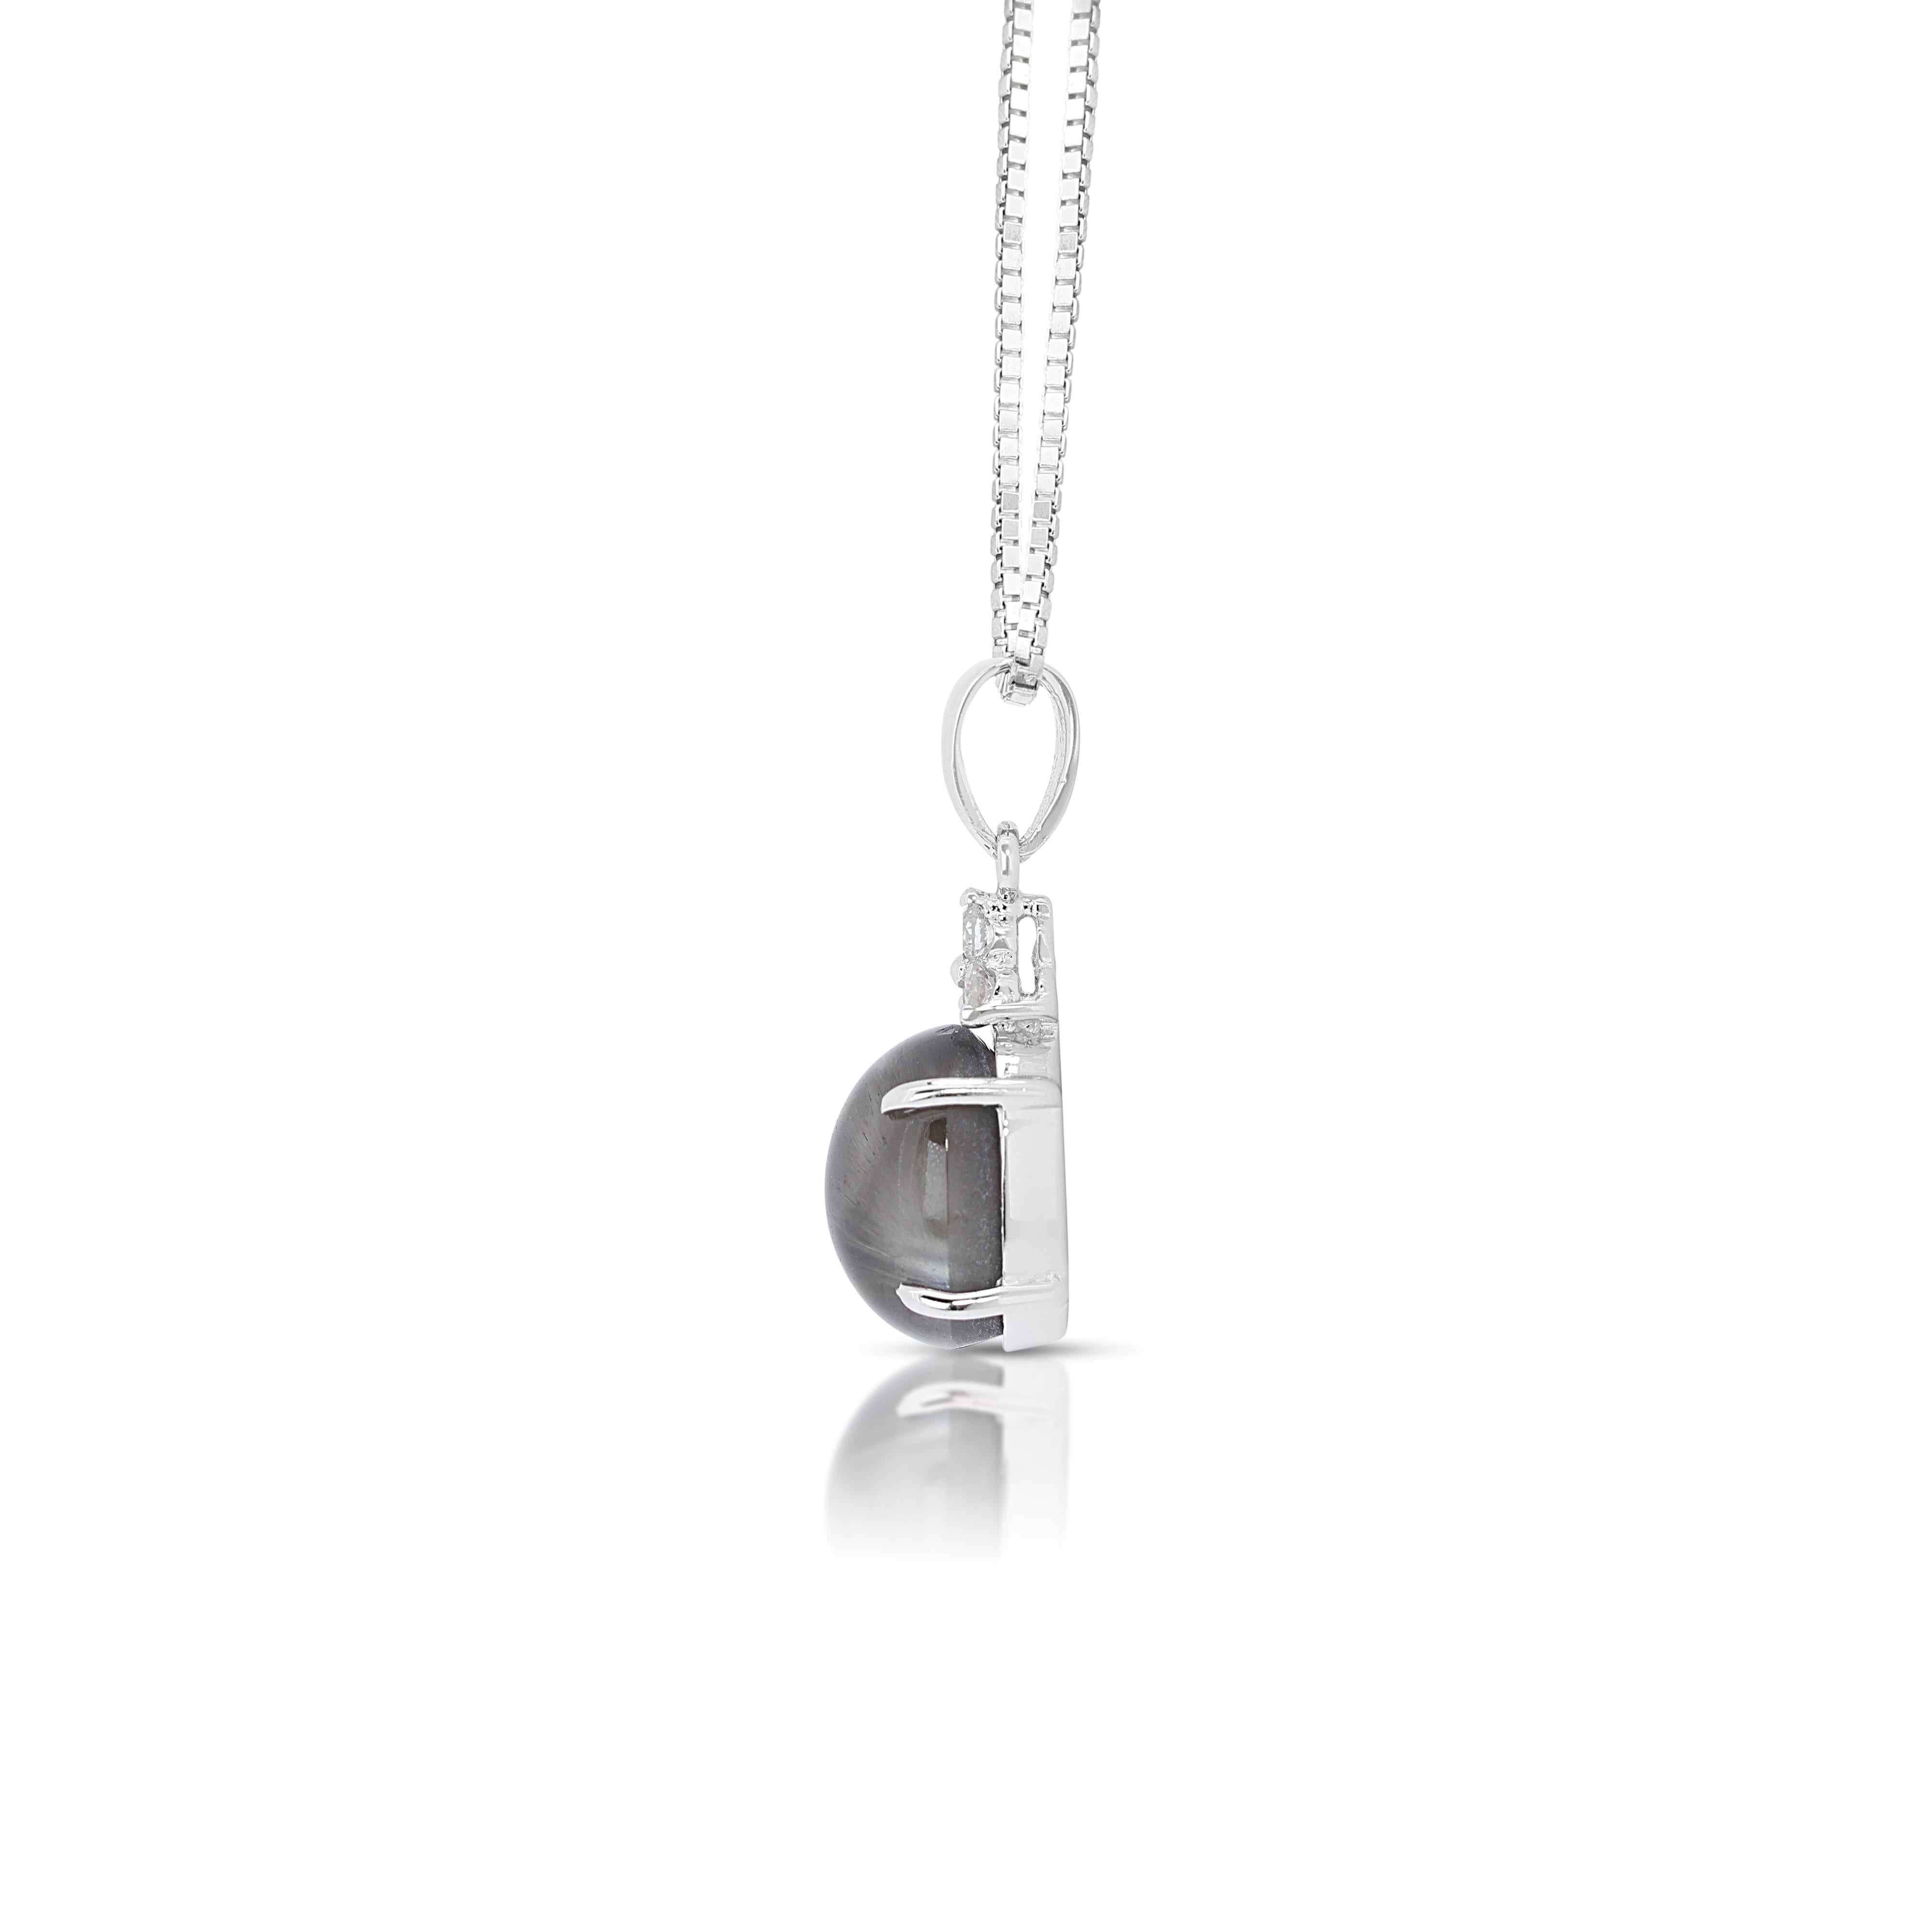 Majestic 4.83ct Cat Eye Pendant w/ Diamonds in 18K White Gold-Chain Not Included For Sale 1